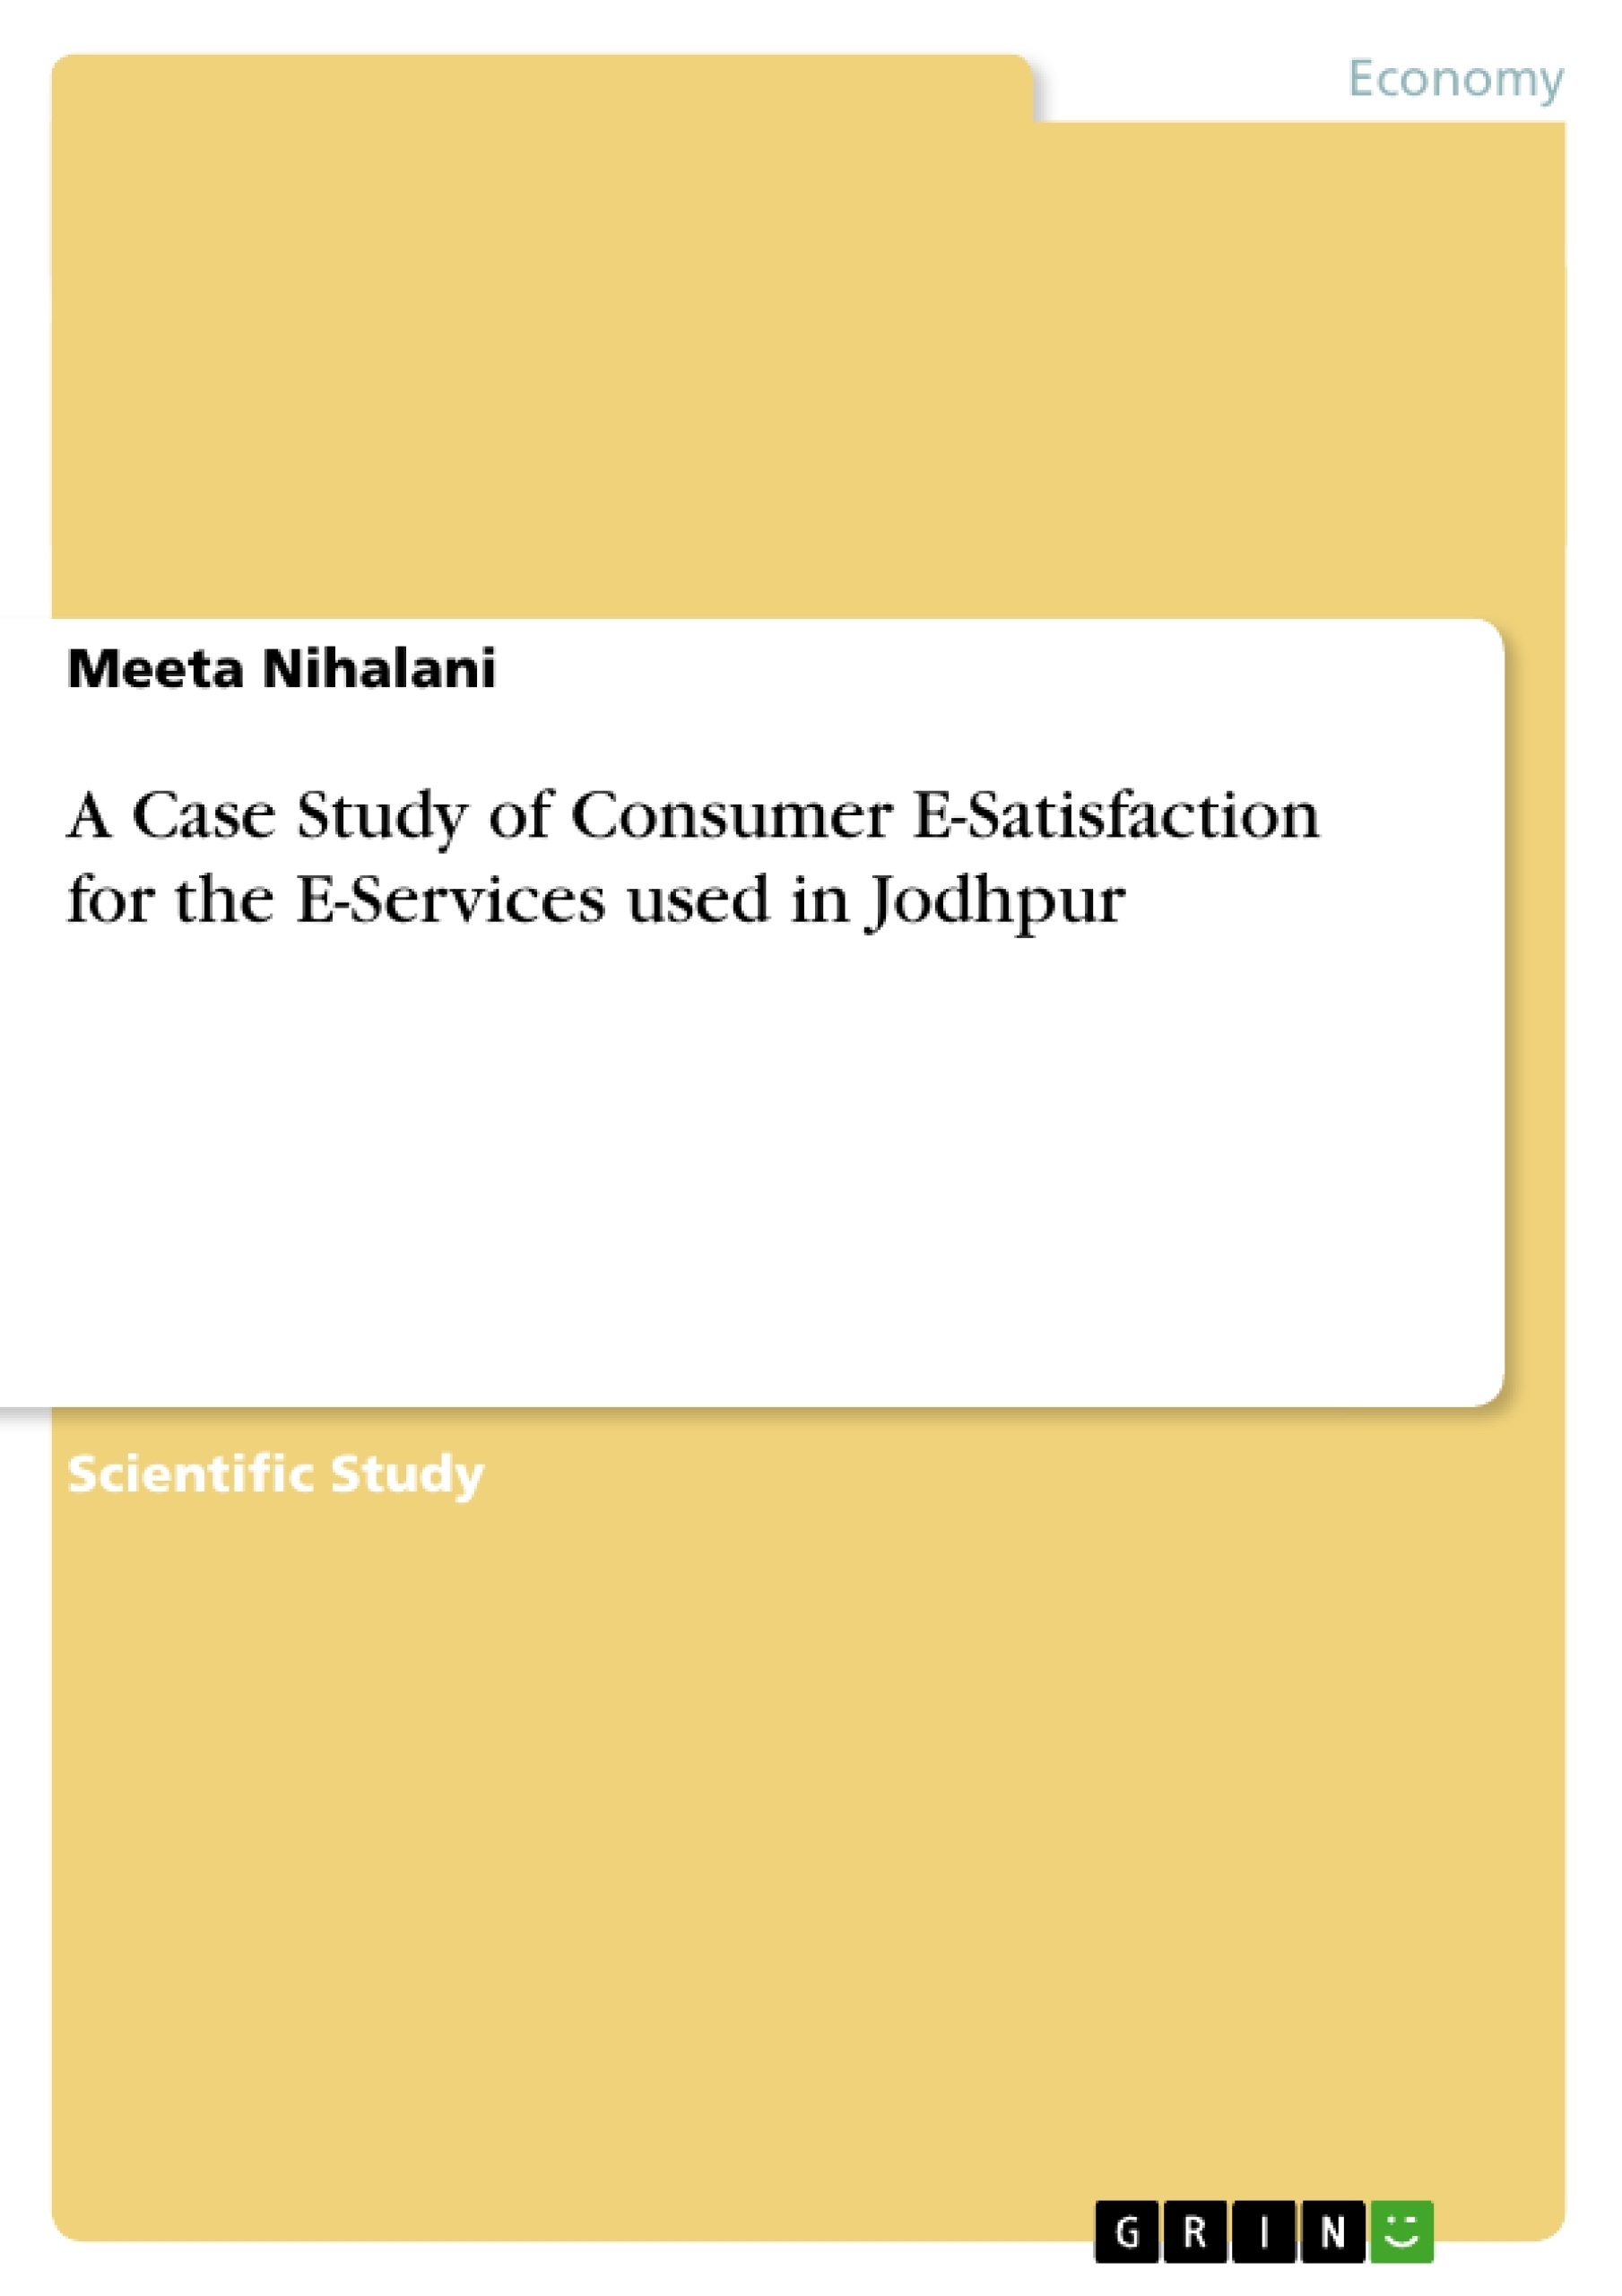 Título: A Case Study of Consumer E-Satisfaction for the E-Services used in Jodhpur